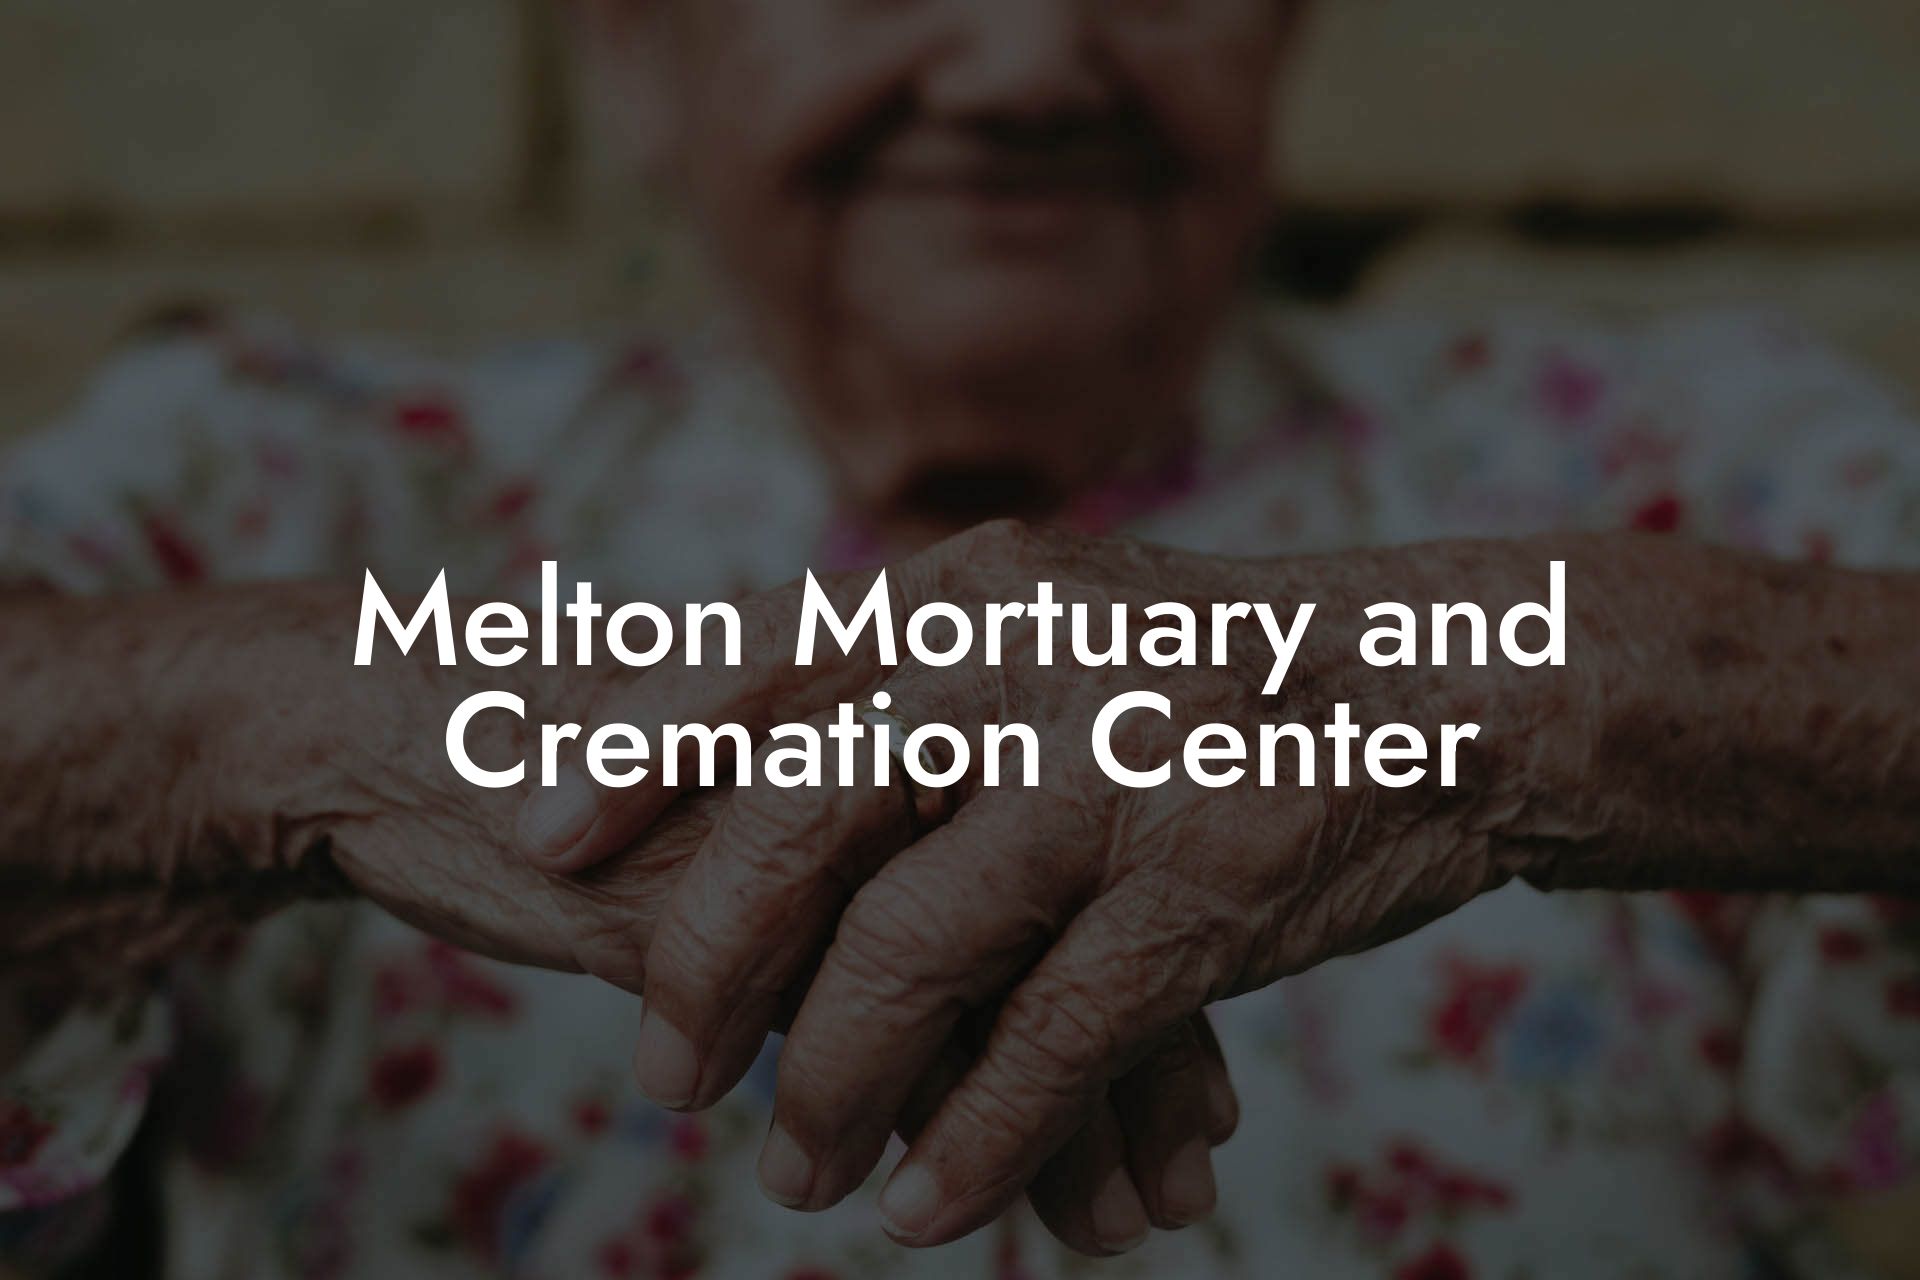 Melton Mortuary and Cremation Center